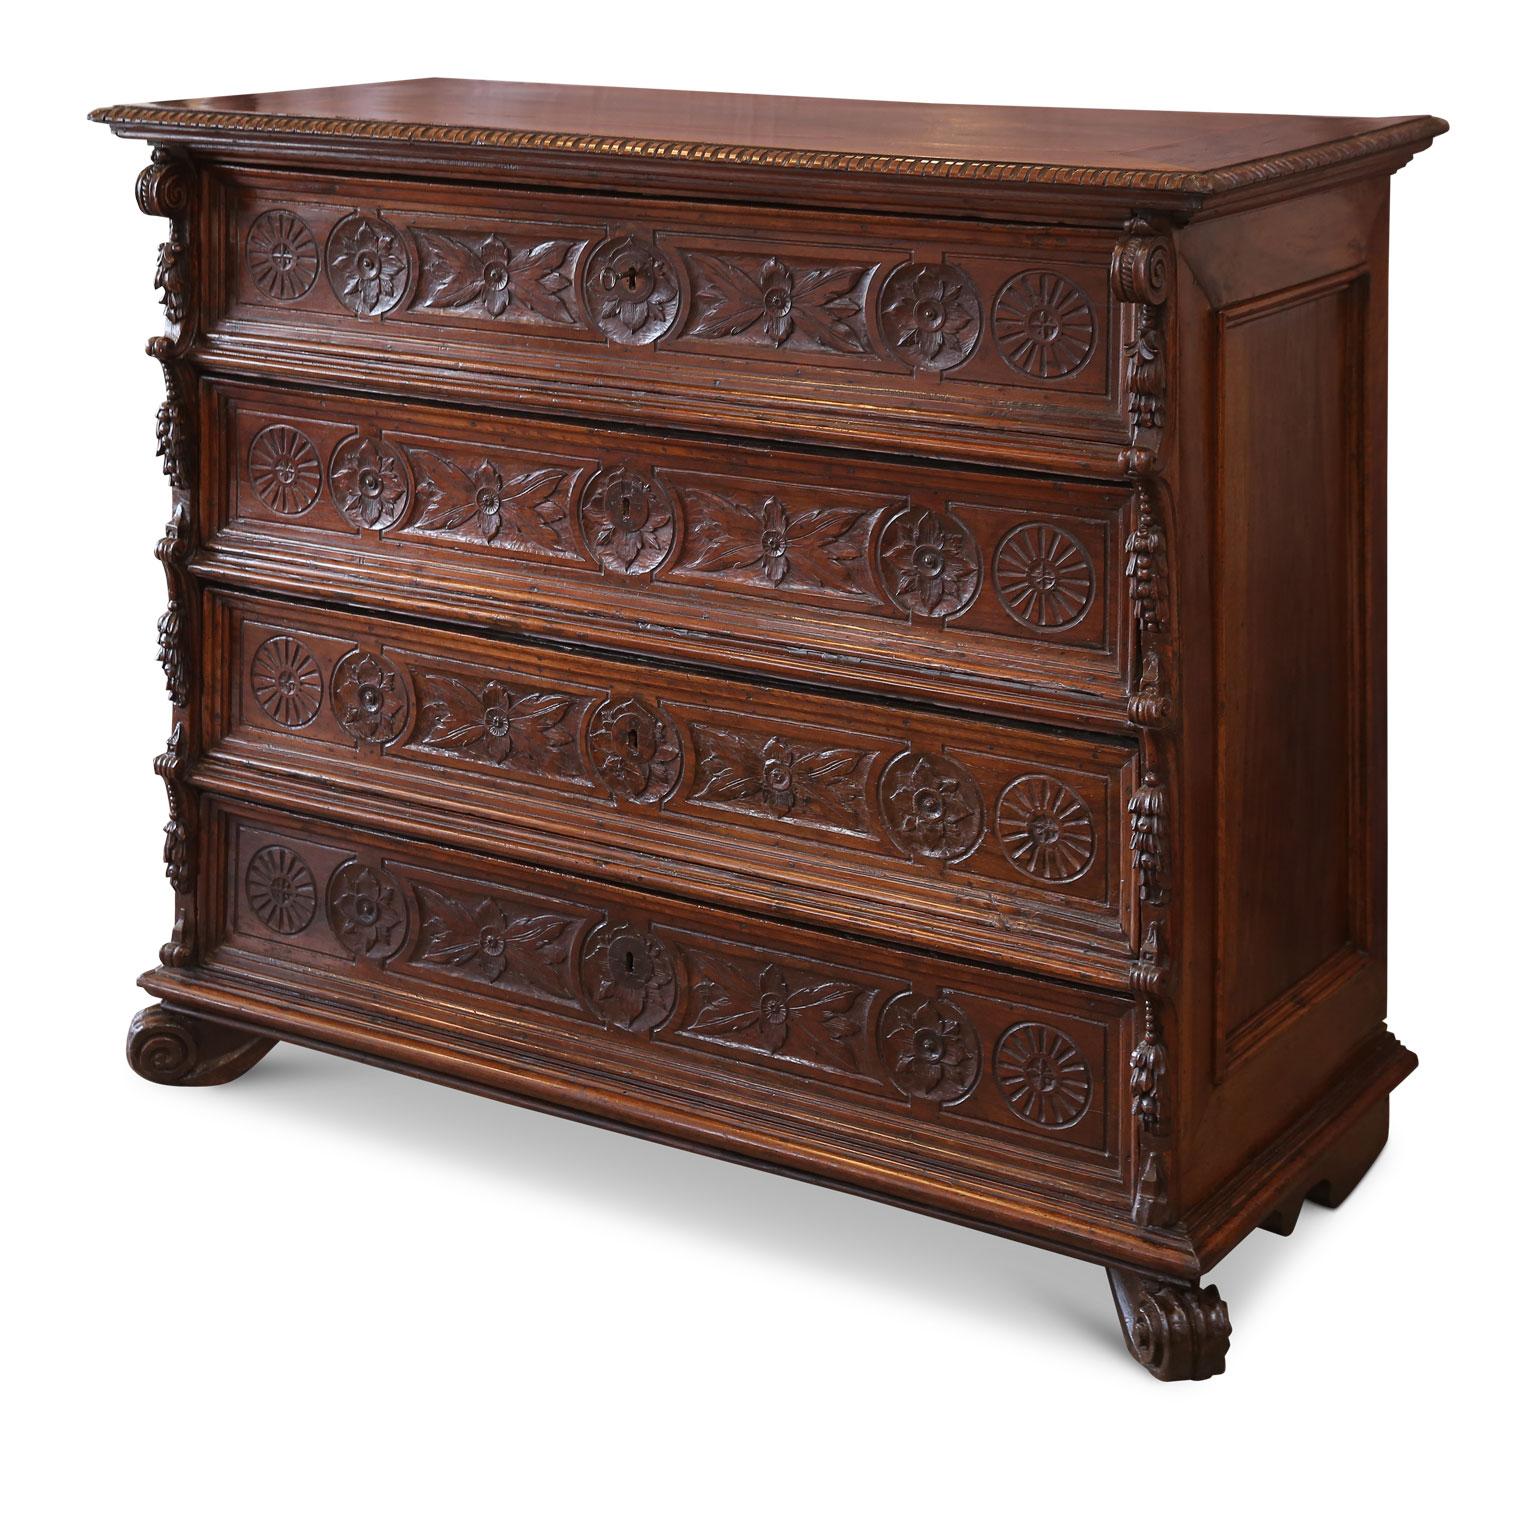 17th century French walnut chest of drawers (circa 1675-1700) hand-carved in a Louis XIII provincial style (Mannerist with Italian influence).

Extremely sturdy, almost completely original. Constructed using mortis and Tenon joints, horse glue and